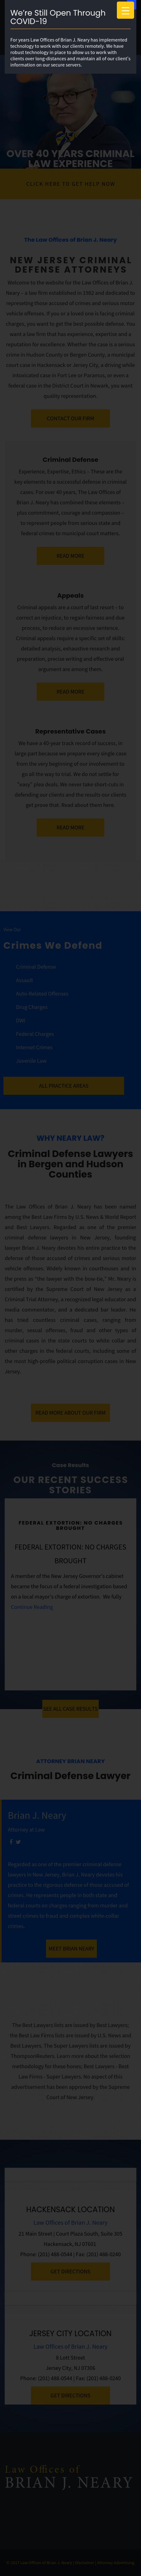 Law Offices of Brian J. Neary - Jersey City NJ Lawyers